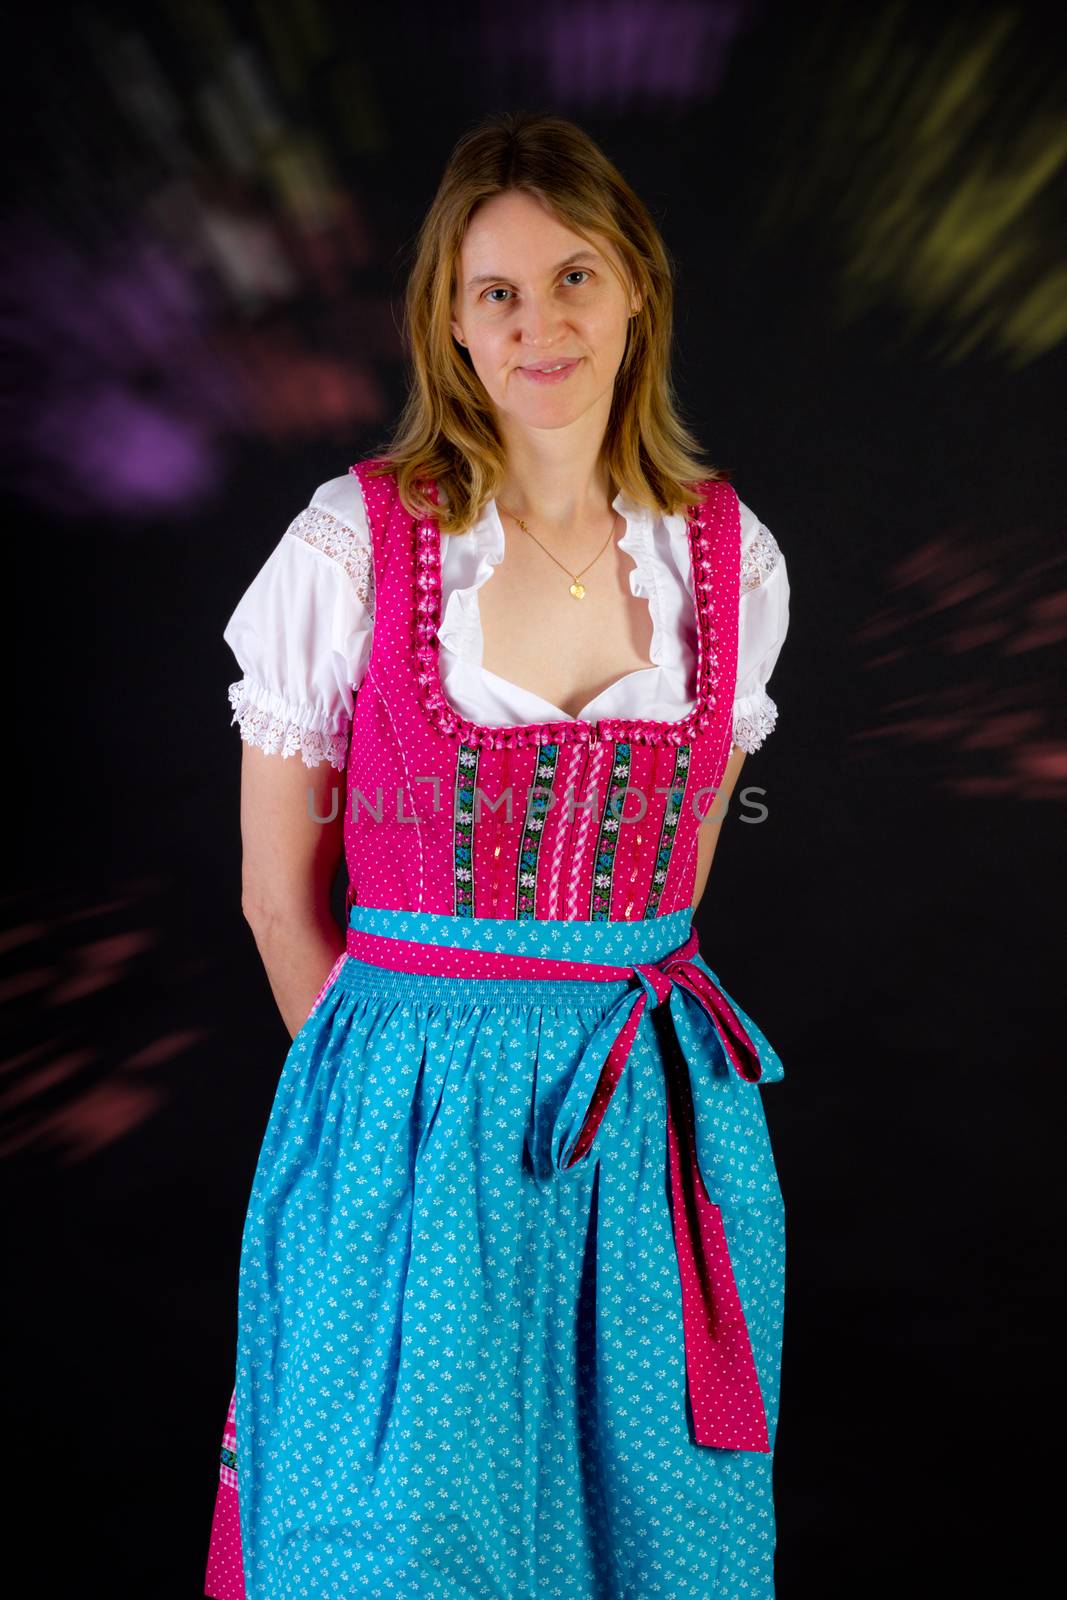 Woman in dirndl at Oktoberfest by gwolters